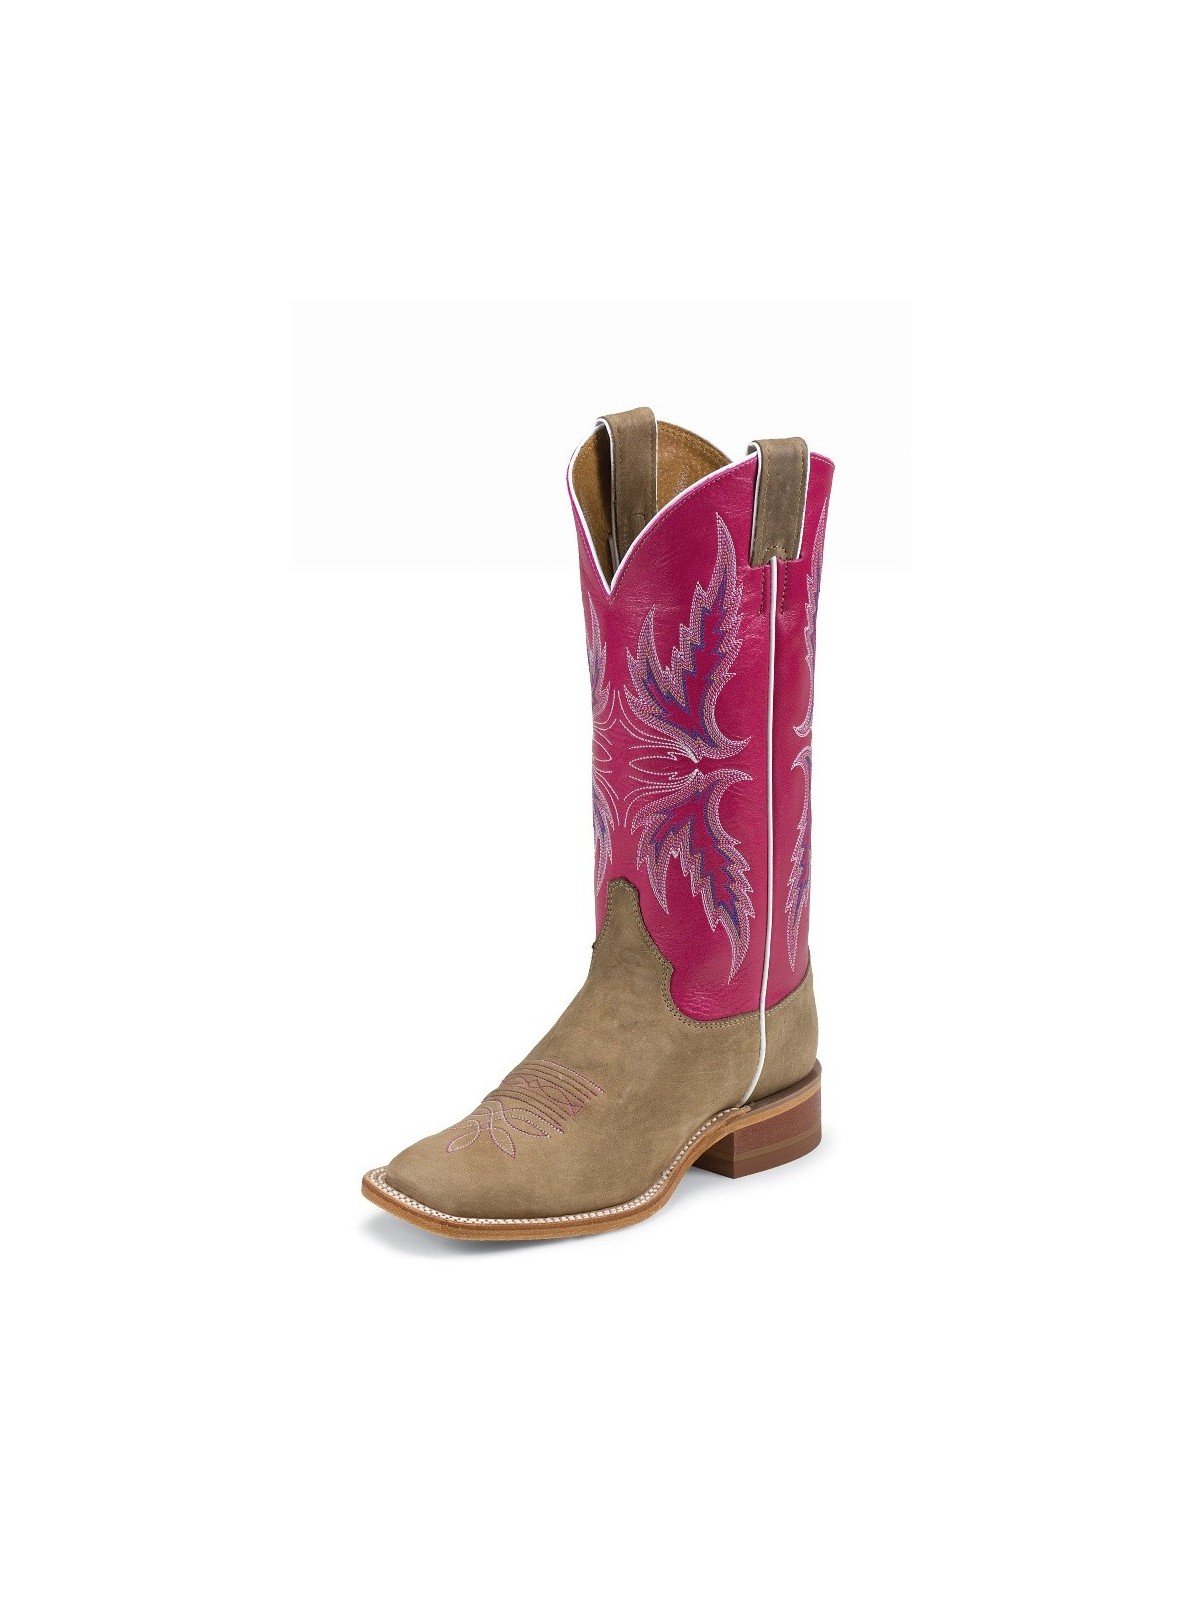 Justin Boots Women's Western Boots Tan/Pink BRL311